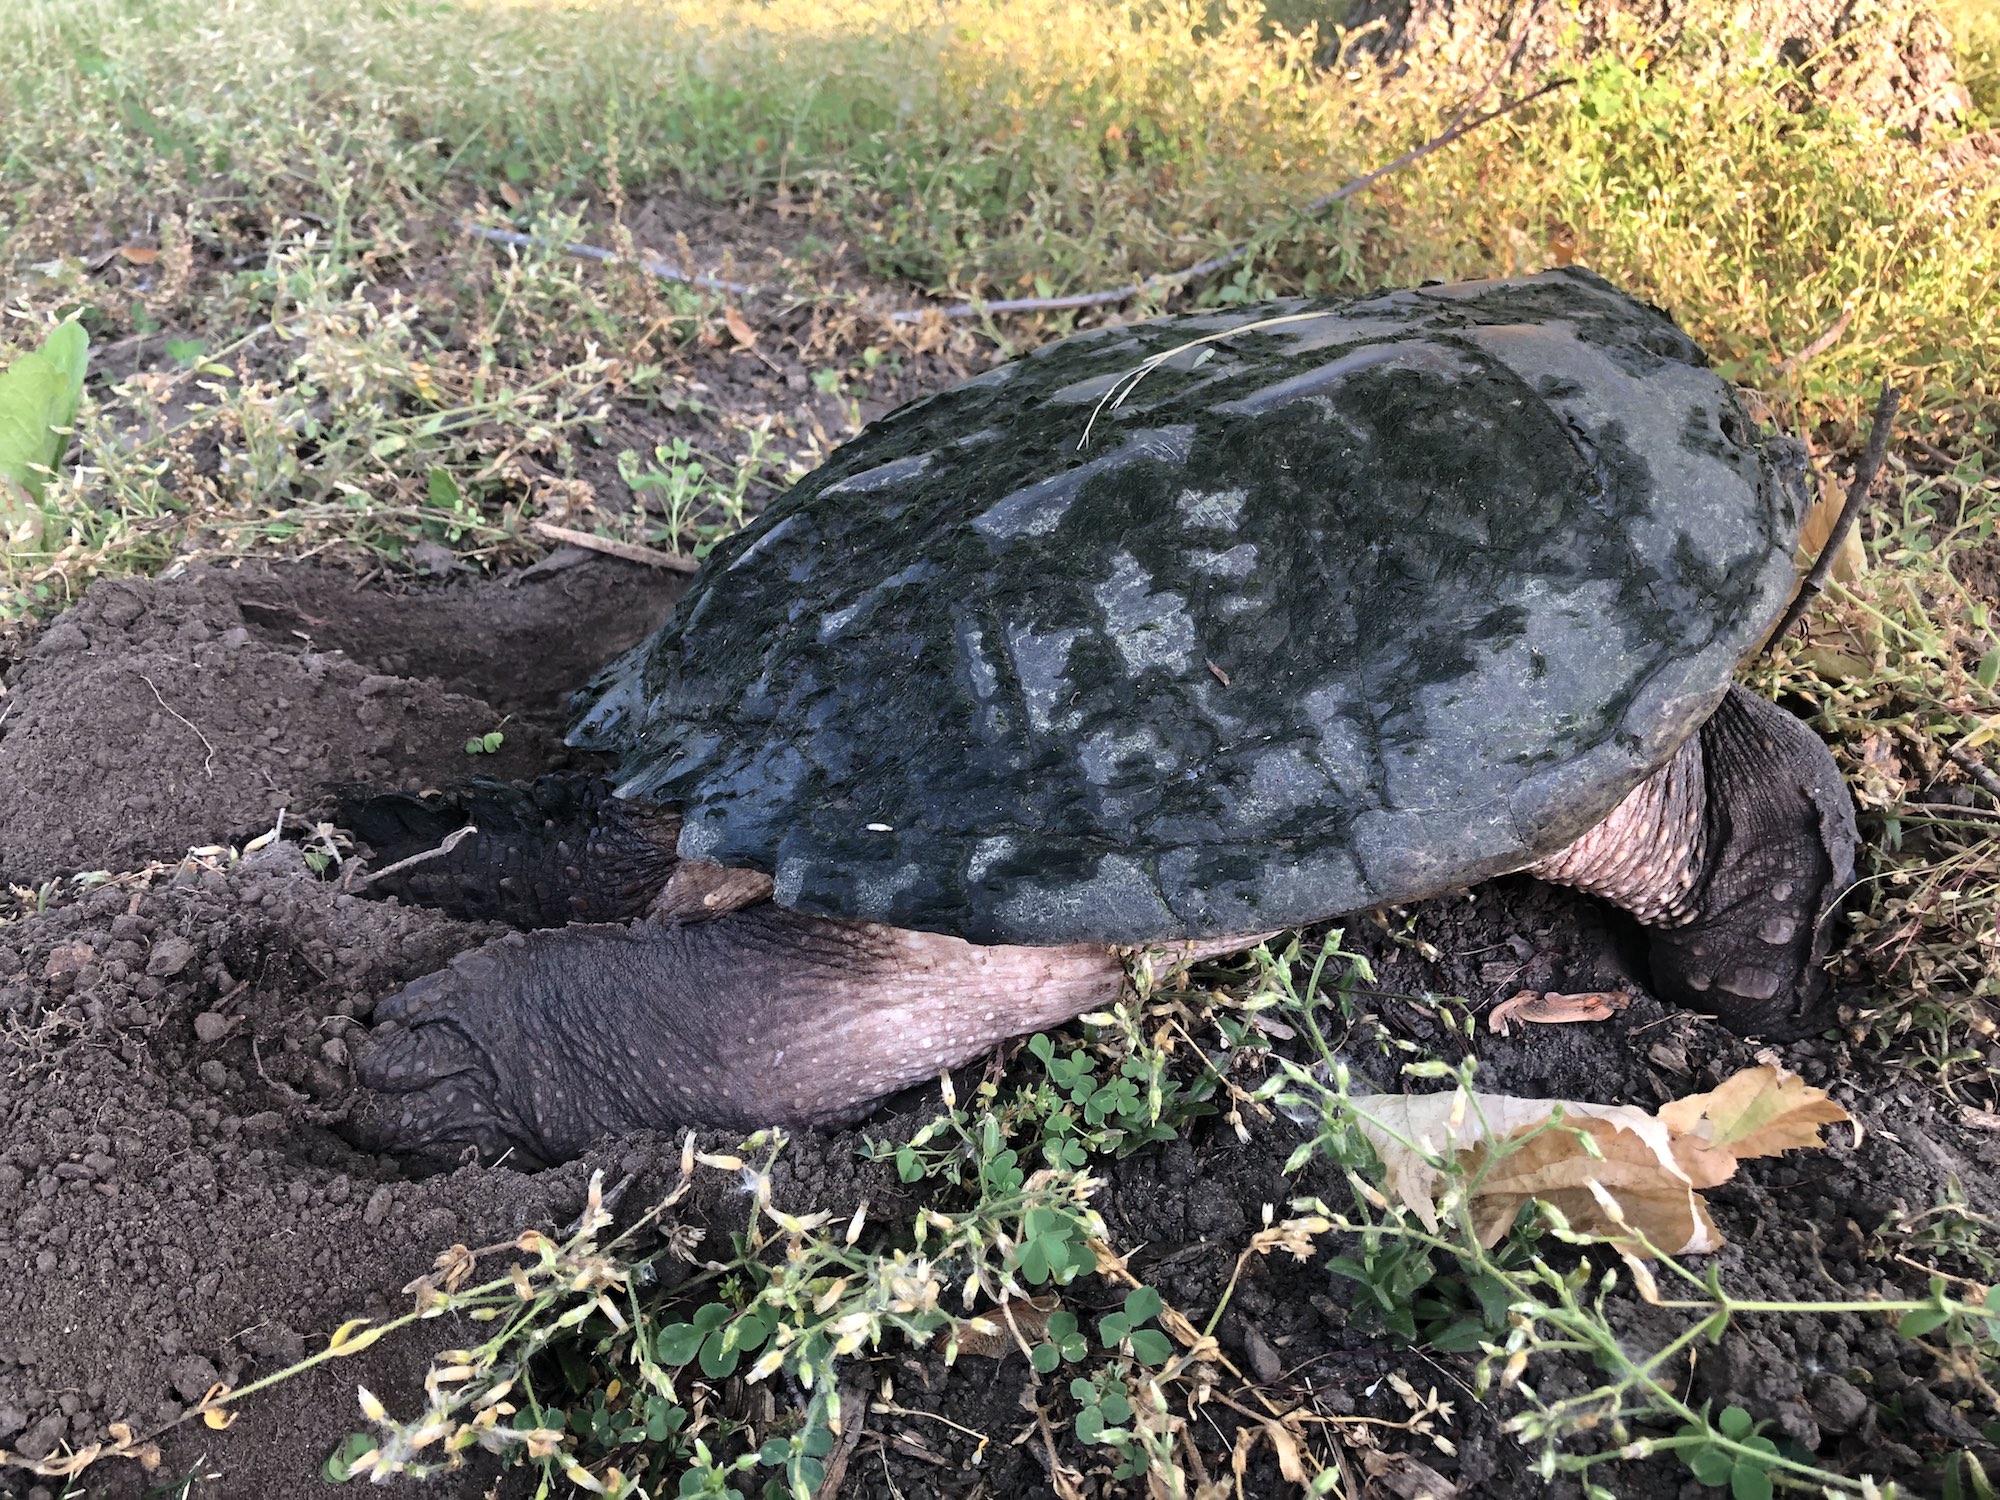 Snapping Turtle in E. Ray Stevens Pond and Aquatic Gardens on corner of Manitou Way and Nakoma Road in Madison, Wisconsin on June 6, 2021.